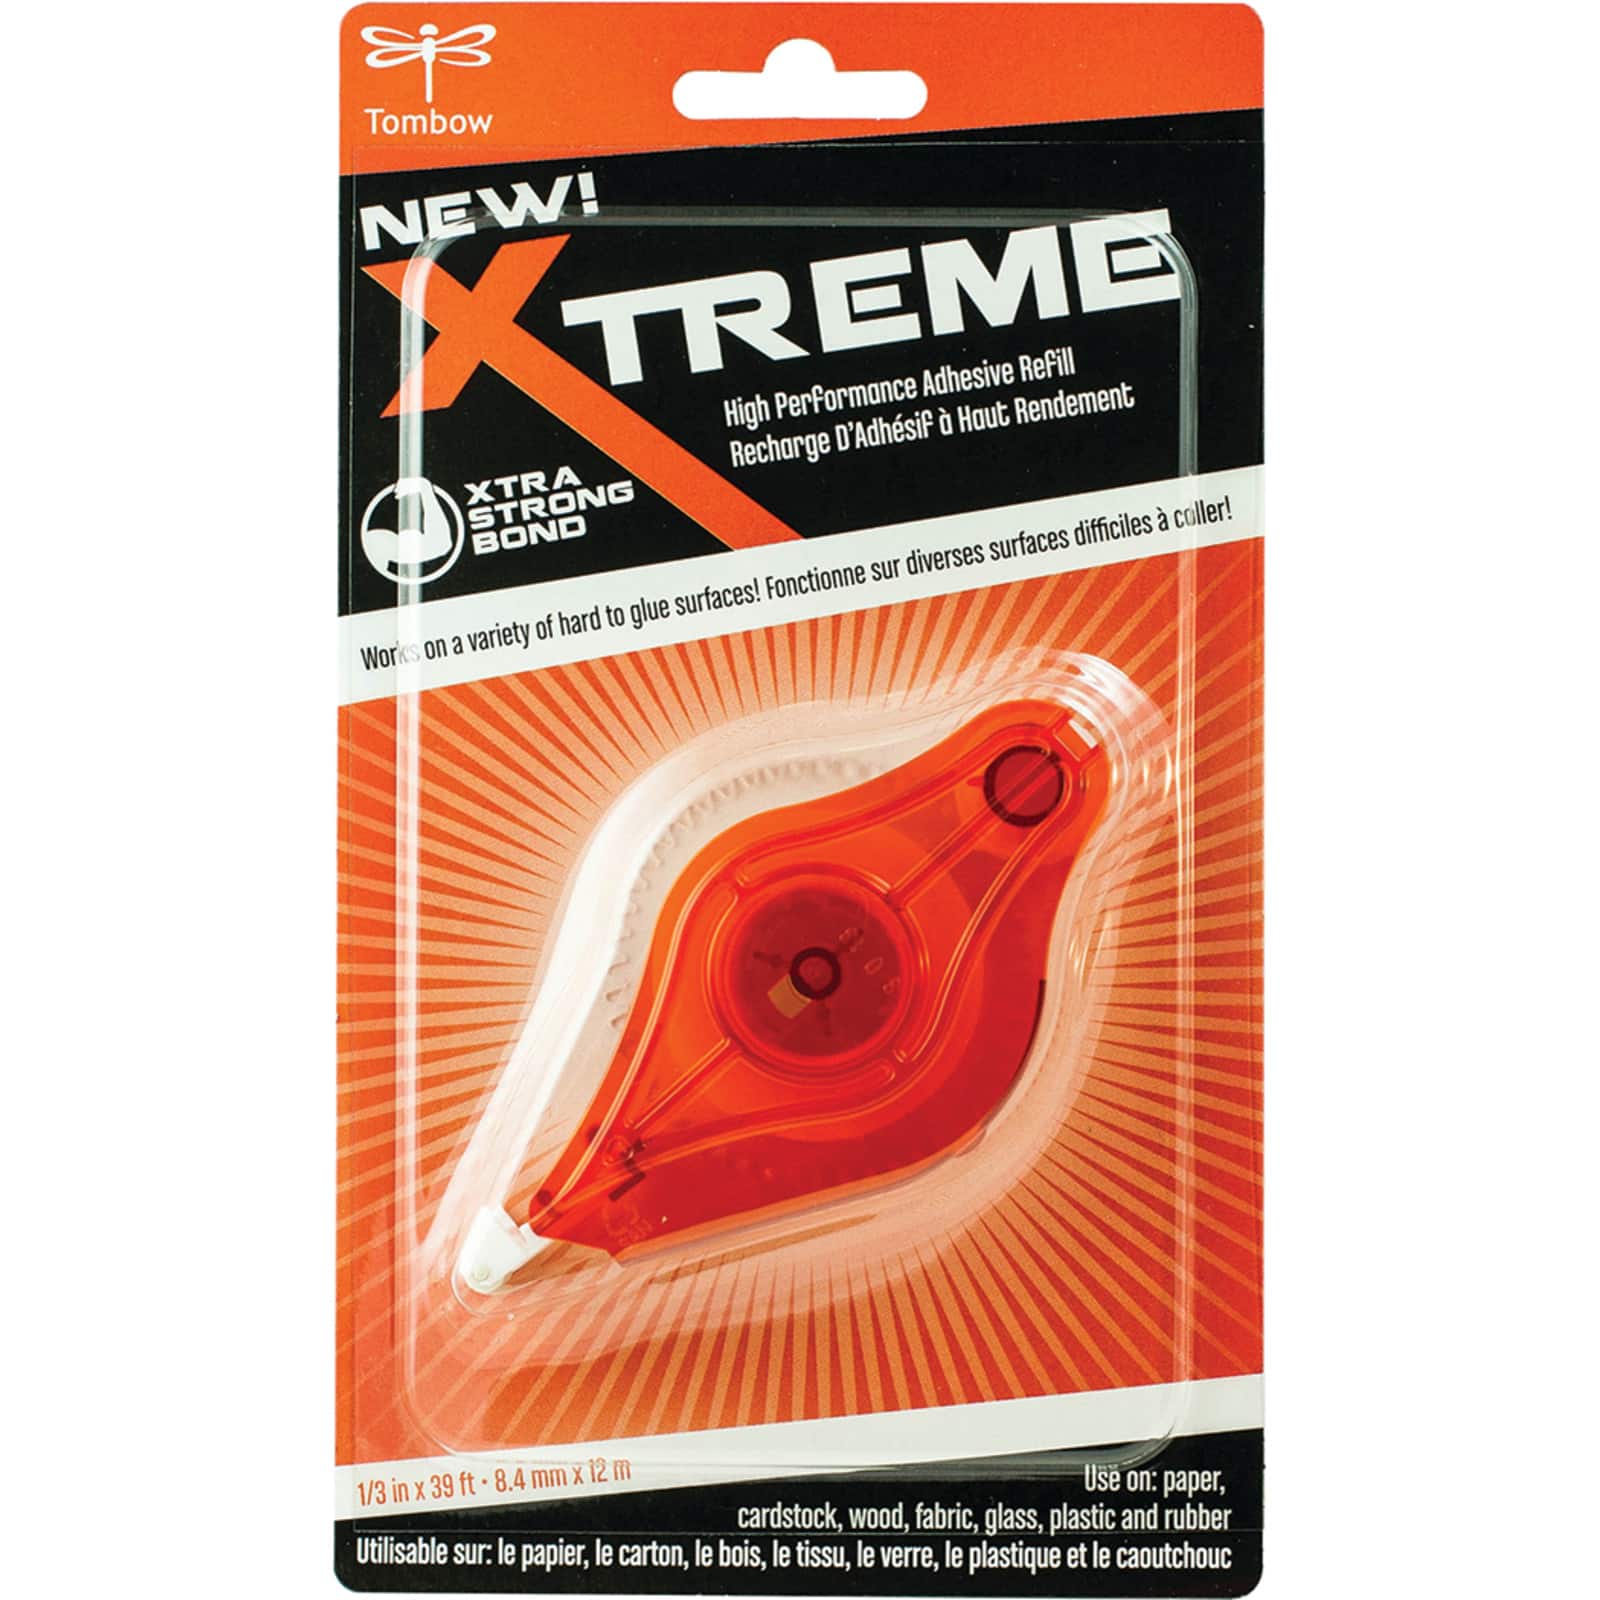 Tombow Xtreme Adhesive Tape Runner, Permanent